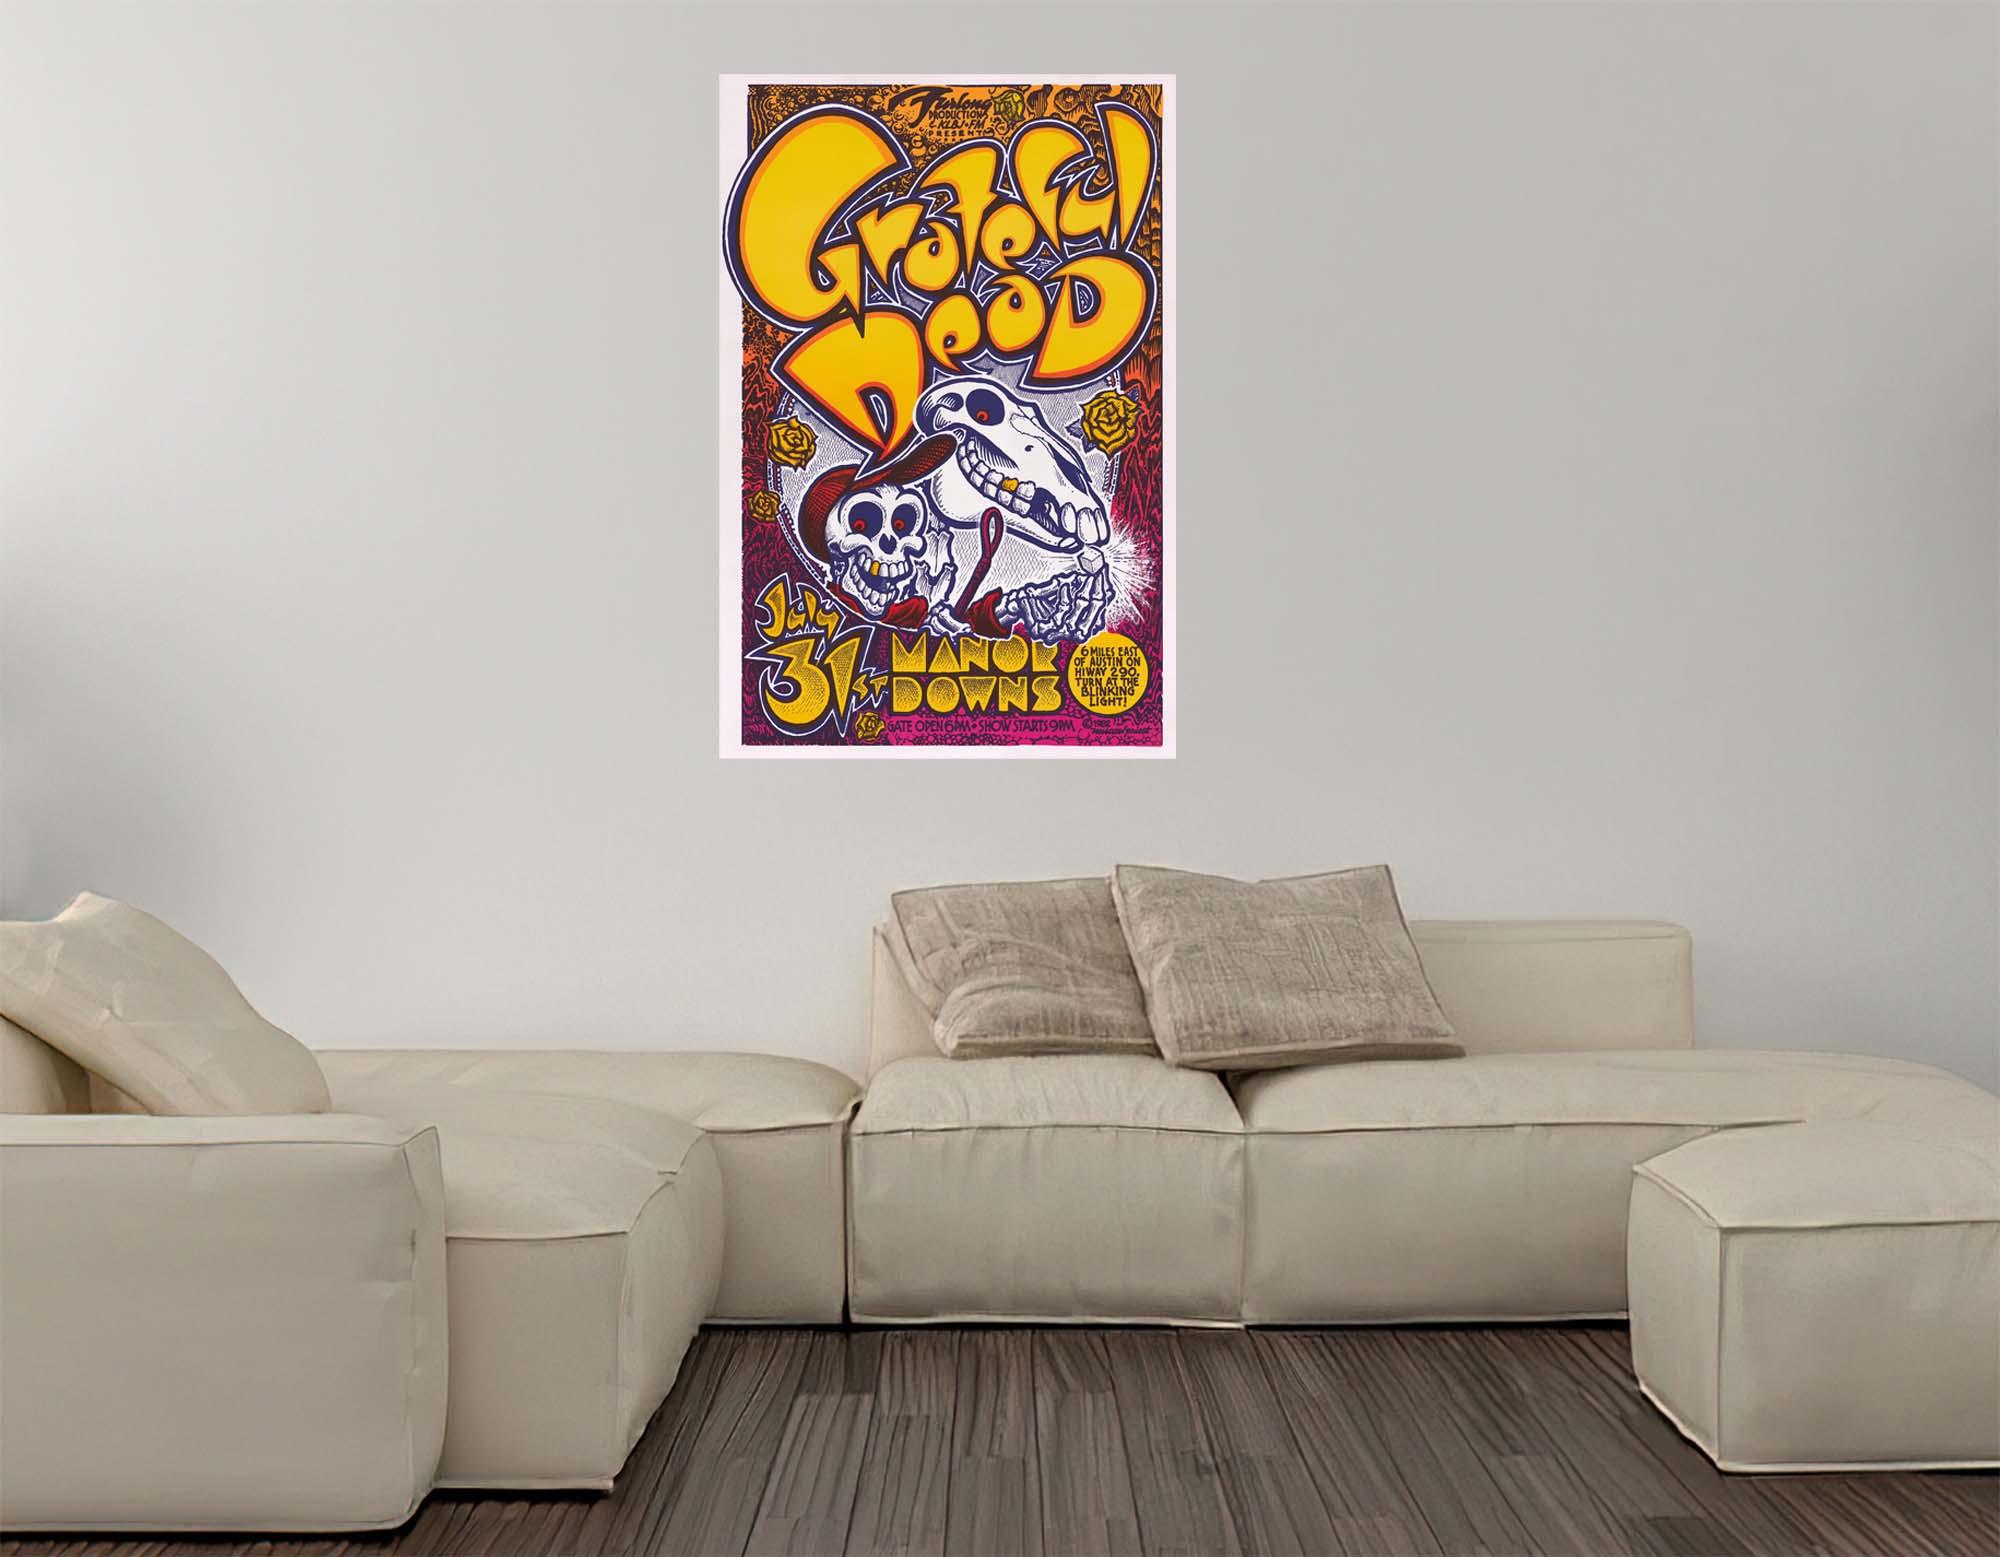 CoolWalls.ca Posters, Prints, & Visual Artwork Grateful Dead Vintage Poster: Peel_n_Stick onto the wall, wallpaper like fabric